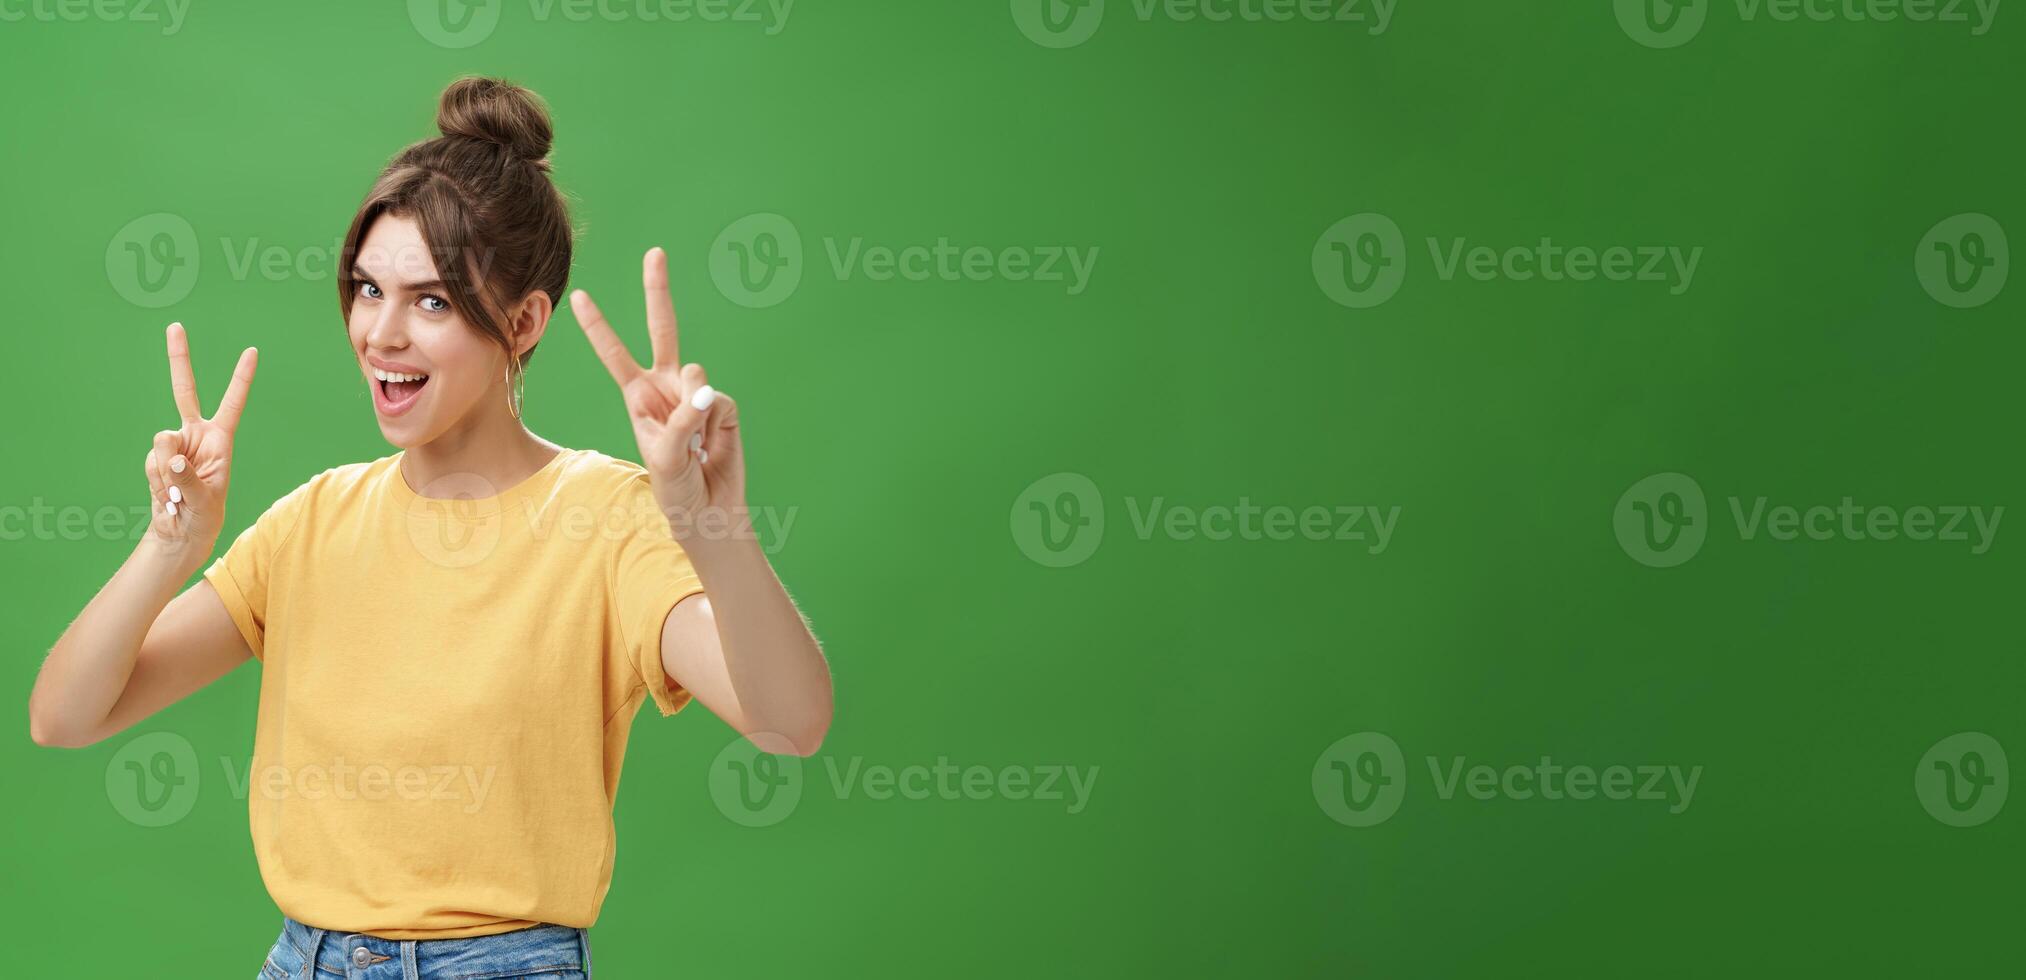 Indoor shot of enthusiastic excited and happy daring girl with combed hair tattoo and cute diasdema showing peace signs bending backwards standing in cool energized pose over green background photo